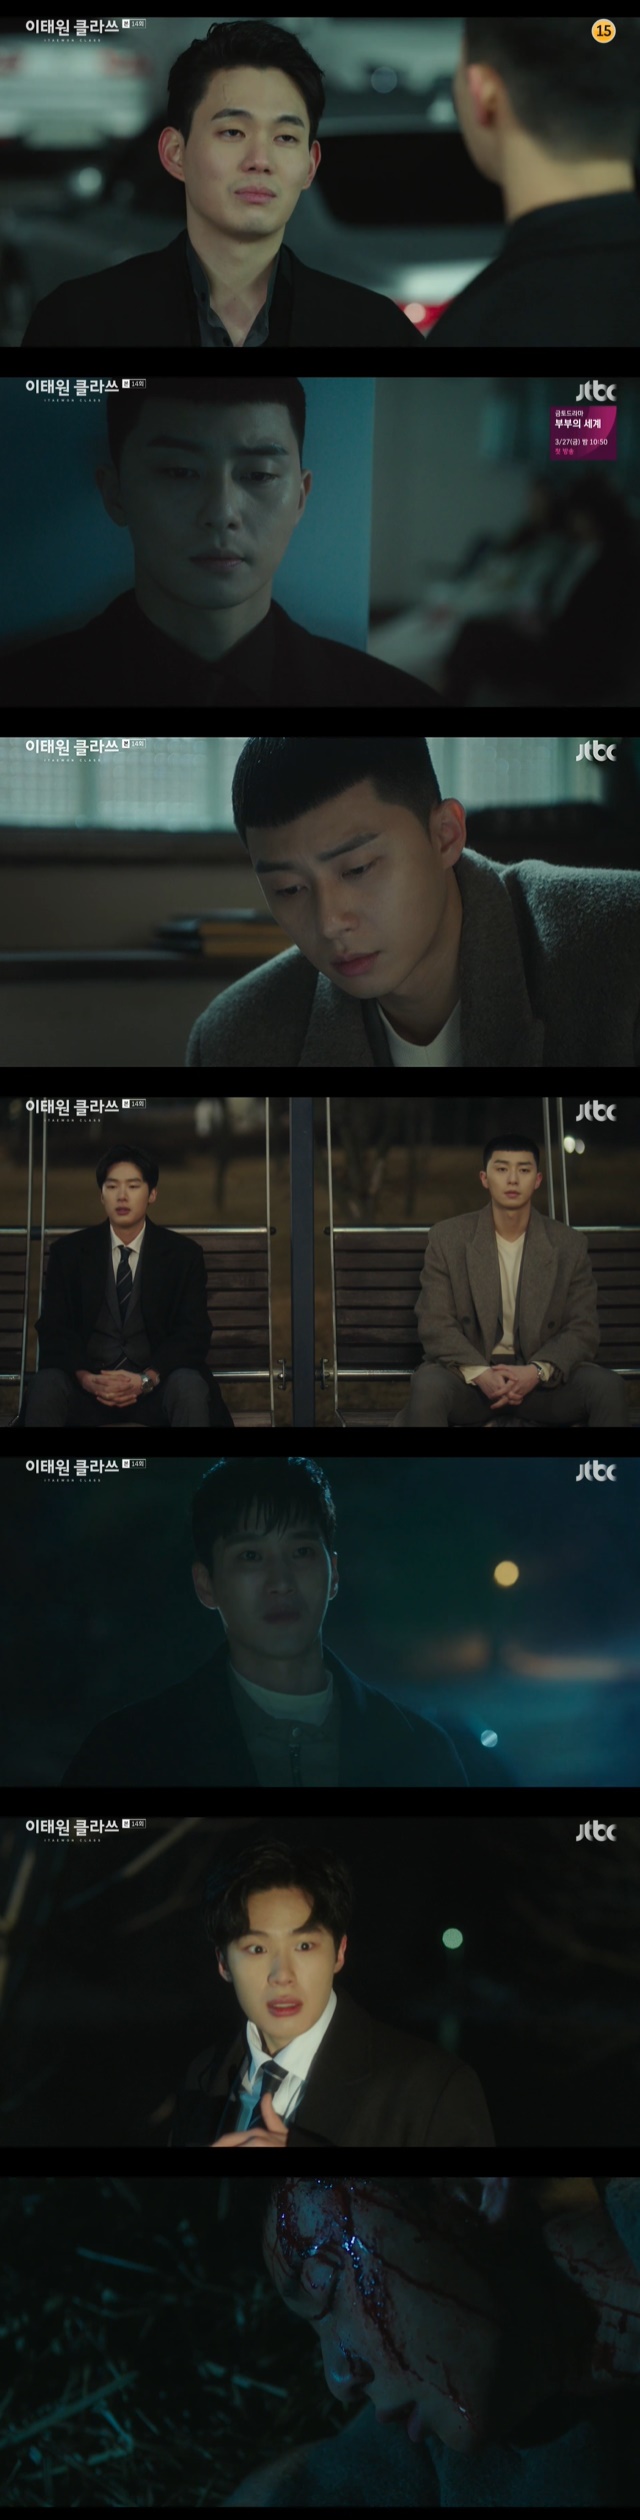 Park Seo-joon was in danger of losing his life as soon as he realized his love for Kim Da-mi.In the 14th episode of JTBCs gilt drama Itaewon Klath (playplayed by Cho Kwang-jin/directed by Kim Sung-yoon), which aired on March 14, Park Sae-ro-yi (Park Seo-joon) was involved in a ruse by Jean Fountainhead (played by Ahn Bo-hyun).Park Sae-ro-yi, who informed Joy Seo (Kim Da-mi) that Jang Dae-hee (Yoo Jae-myung) had been sentenced to a deadline, later planned to dismiss the existing outside board members along with Kang Min-jung (Kim Hye-eun) and Lee Ho-jin (Lee Dae-wit) and establish Joy Seo as a new outside director.Park Sae-ro-yi, who had already seen Joy Seo working without a break from sleep on a Chinese contract, was worried about his health.Joy asked, If youre so sorry, just give me a wish, just give me a date, but Park Sae-ro-yi pushed it away, Do it properly.Park Sae-ro-yi, who was working with Joy, noticed when a call came from Oh Soo-ah (Kwon Na-ra).Joy said, Someone can not love and works all night.Park Sae-ro-yi once again drew a line to such a Joy, but was confused, saying, Why should I feel sorry for you?Joy provoked Park Sae-ro-yi by saying, I feel a little like a woman.Park Sae-ro-yi, whose scheduled schedule was cancelled, met Oh Soo-ah at a cafe.Oh Soo-ah said he had achieved what he wanted but felt emptiness and asked if he still liked himself; however, Park Sae-ro-yi did not answer easily.At this time, Joy Seo, who met Jang Geun-soo (Kim Dong-hee), came into the same cafe and ran out of the cafe after seeing the two people.Oh Soo-ah caught Park Sae-ro-yi, who had a hunch that Park Sae-ro-yis mind had changed and was trying to follow Joy. Oh Soo-ah said, It is 15 years.You have to make me a white man, you have to like me. But Park Sae-ro-yi finally left the cafe without saying that he liked Oh Soo-ah.Joy, who was overworked on the day of the shareholders meeting, fell in the company lobby.Park Sae-ro-yi, who moved Joy to the hospital and attended the shareholders meeting alone, was all worried about Joy even though the appointment of outside directors was rejected.Park Sae-ro-yi left the back of the shareholders meeting to Kang Min-jung and Lee Ho-jin and went to the hospital where Joy was hospitalized.Park Sae-ro-yi told Joy that he was rejected as an outside director and said he would do his job again, saying, If you move now, you are fired.Choi Seung-kwon (Ryu Kyung-soo) felt the change of Park Sae-ro-yi. Choi Seung-kwon, who asked if he was confused, said, Im bullshit.Seo-yool Lee and I are different in age, he recalled from Joys confession in the past. What about age?I would like to give you a first love hurt for 10 years. After hearing Choi Seung-kwons words, thoughtful Park Sae-ro-yi found a necklace that Joy said he wanted to have on his way.Park Sae-ro-yi, who bought a necklace and visited the hospital, felt guilty when he heard that Joy Seo told Ma Hyun-yi (Lee Joo-young) that if you can express your affection to the representative, you must be the person who must be around you.Park Sae-ro-yi realized the vacancy in Joy.I also realized that Joy Seo is all the most grateful people, the most sorry people, the best luck of my life, and the loved ones in the event phrase that Choi Seung-kwon was talking about.Park Sae-ro-yi, who learned of his love for Joy, ran to the hospital immediately, and just in time Jang Geun-soo ran to the hospital after seeing the article.Park Sae-ro-yi, who always likes Joy, said to Jang Geun-soo, I understand. Seo-yool Lee is a woman who can risk life.Im going to do it, betrayal, trash, and swearing, and if you hit me, Ill be right.I like Seo-yool Lee, I wont say Im sorry.The Fountainhead (by Ahn Bo-hyun) used Kim Hee-hoon (by Won Hyun-jun) to kidnap Joy.Park Sae-ro-yi moved to the place where he was texted to save Joy, and Jang Geun-soo, who had a gut feeling that he had a problem with Joys personal life, followed behind Park Sae-ro-yi.Lee Ha-na